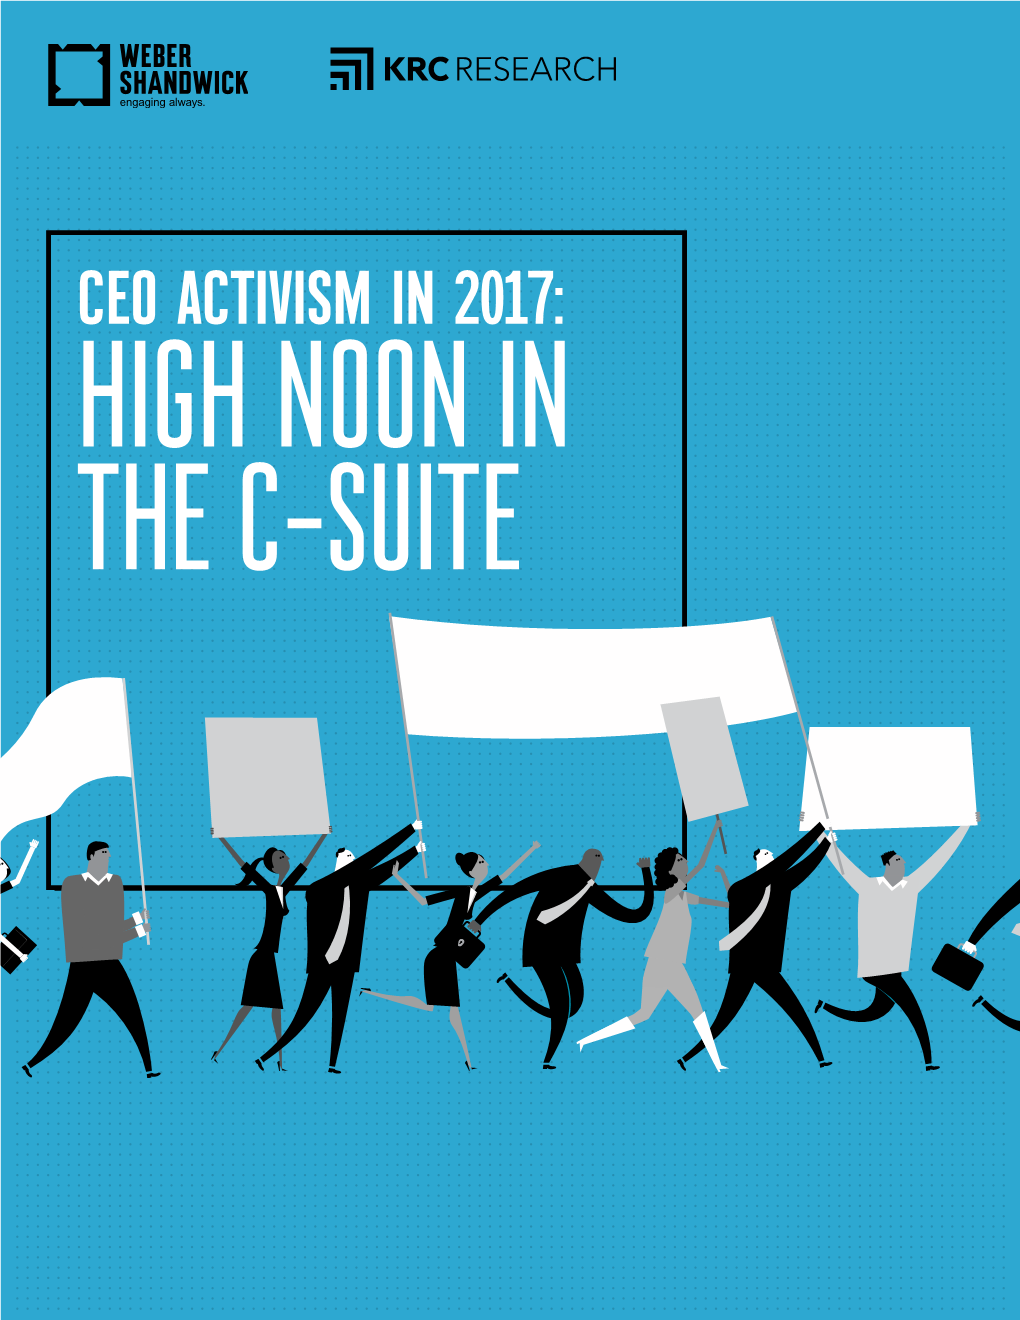 CEO Activism in 2017: High Noon in the C-Suite